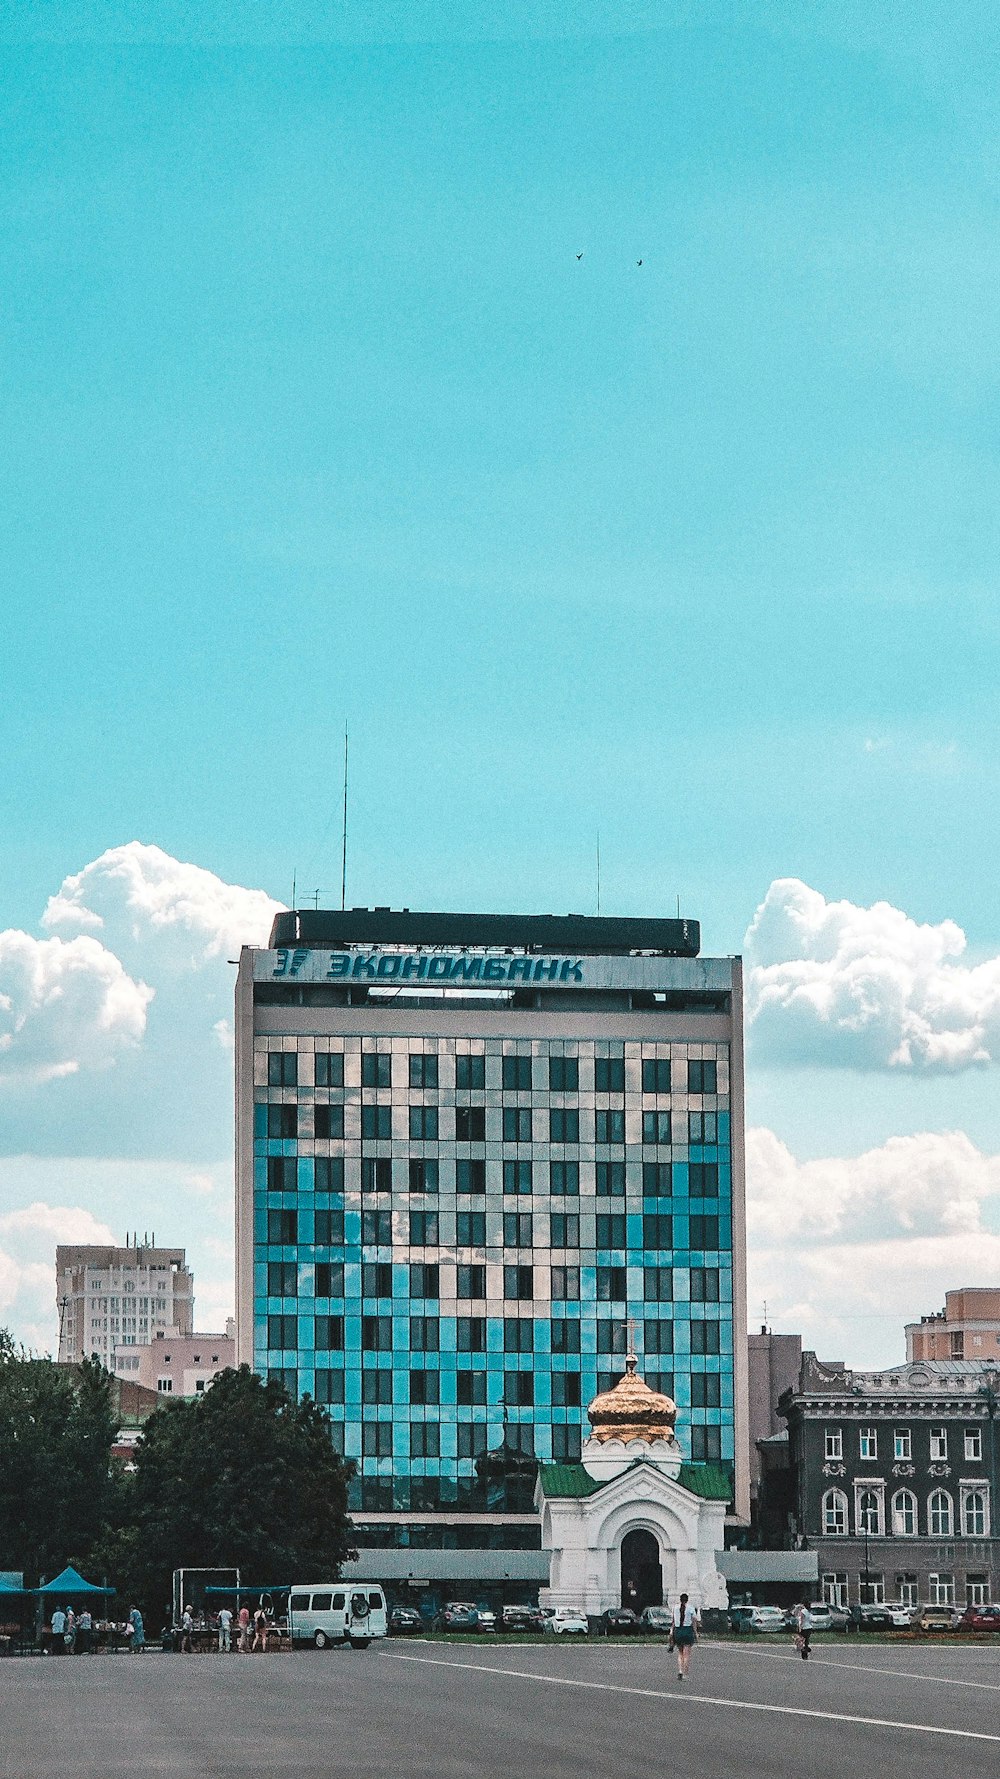 brown and white concrete building under blue sky during daytime